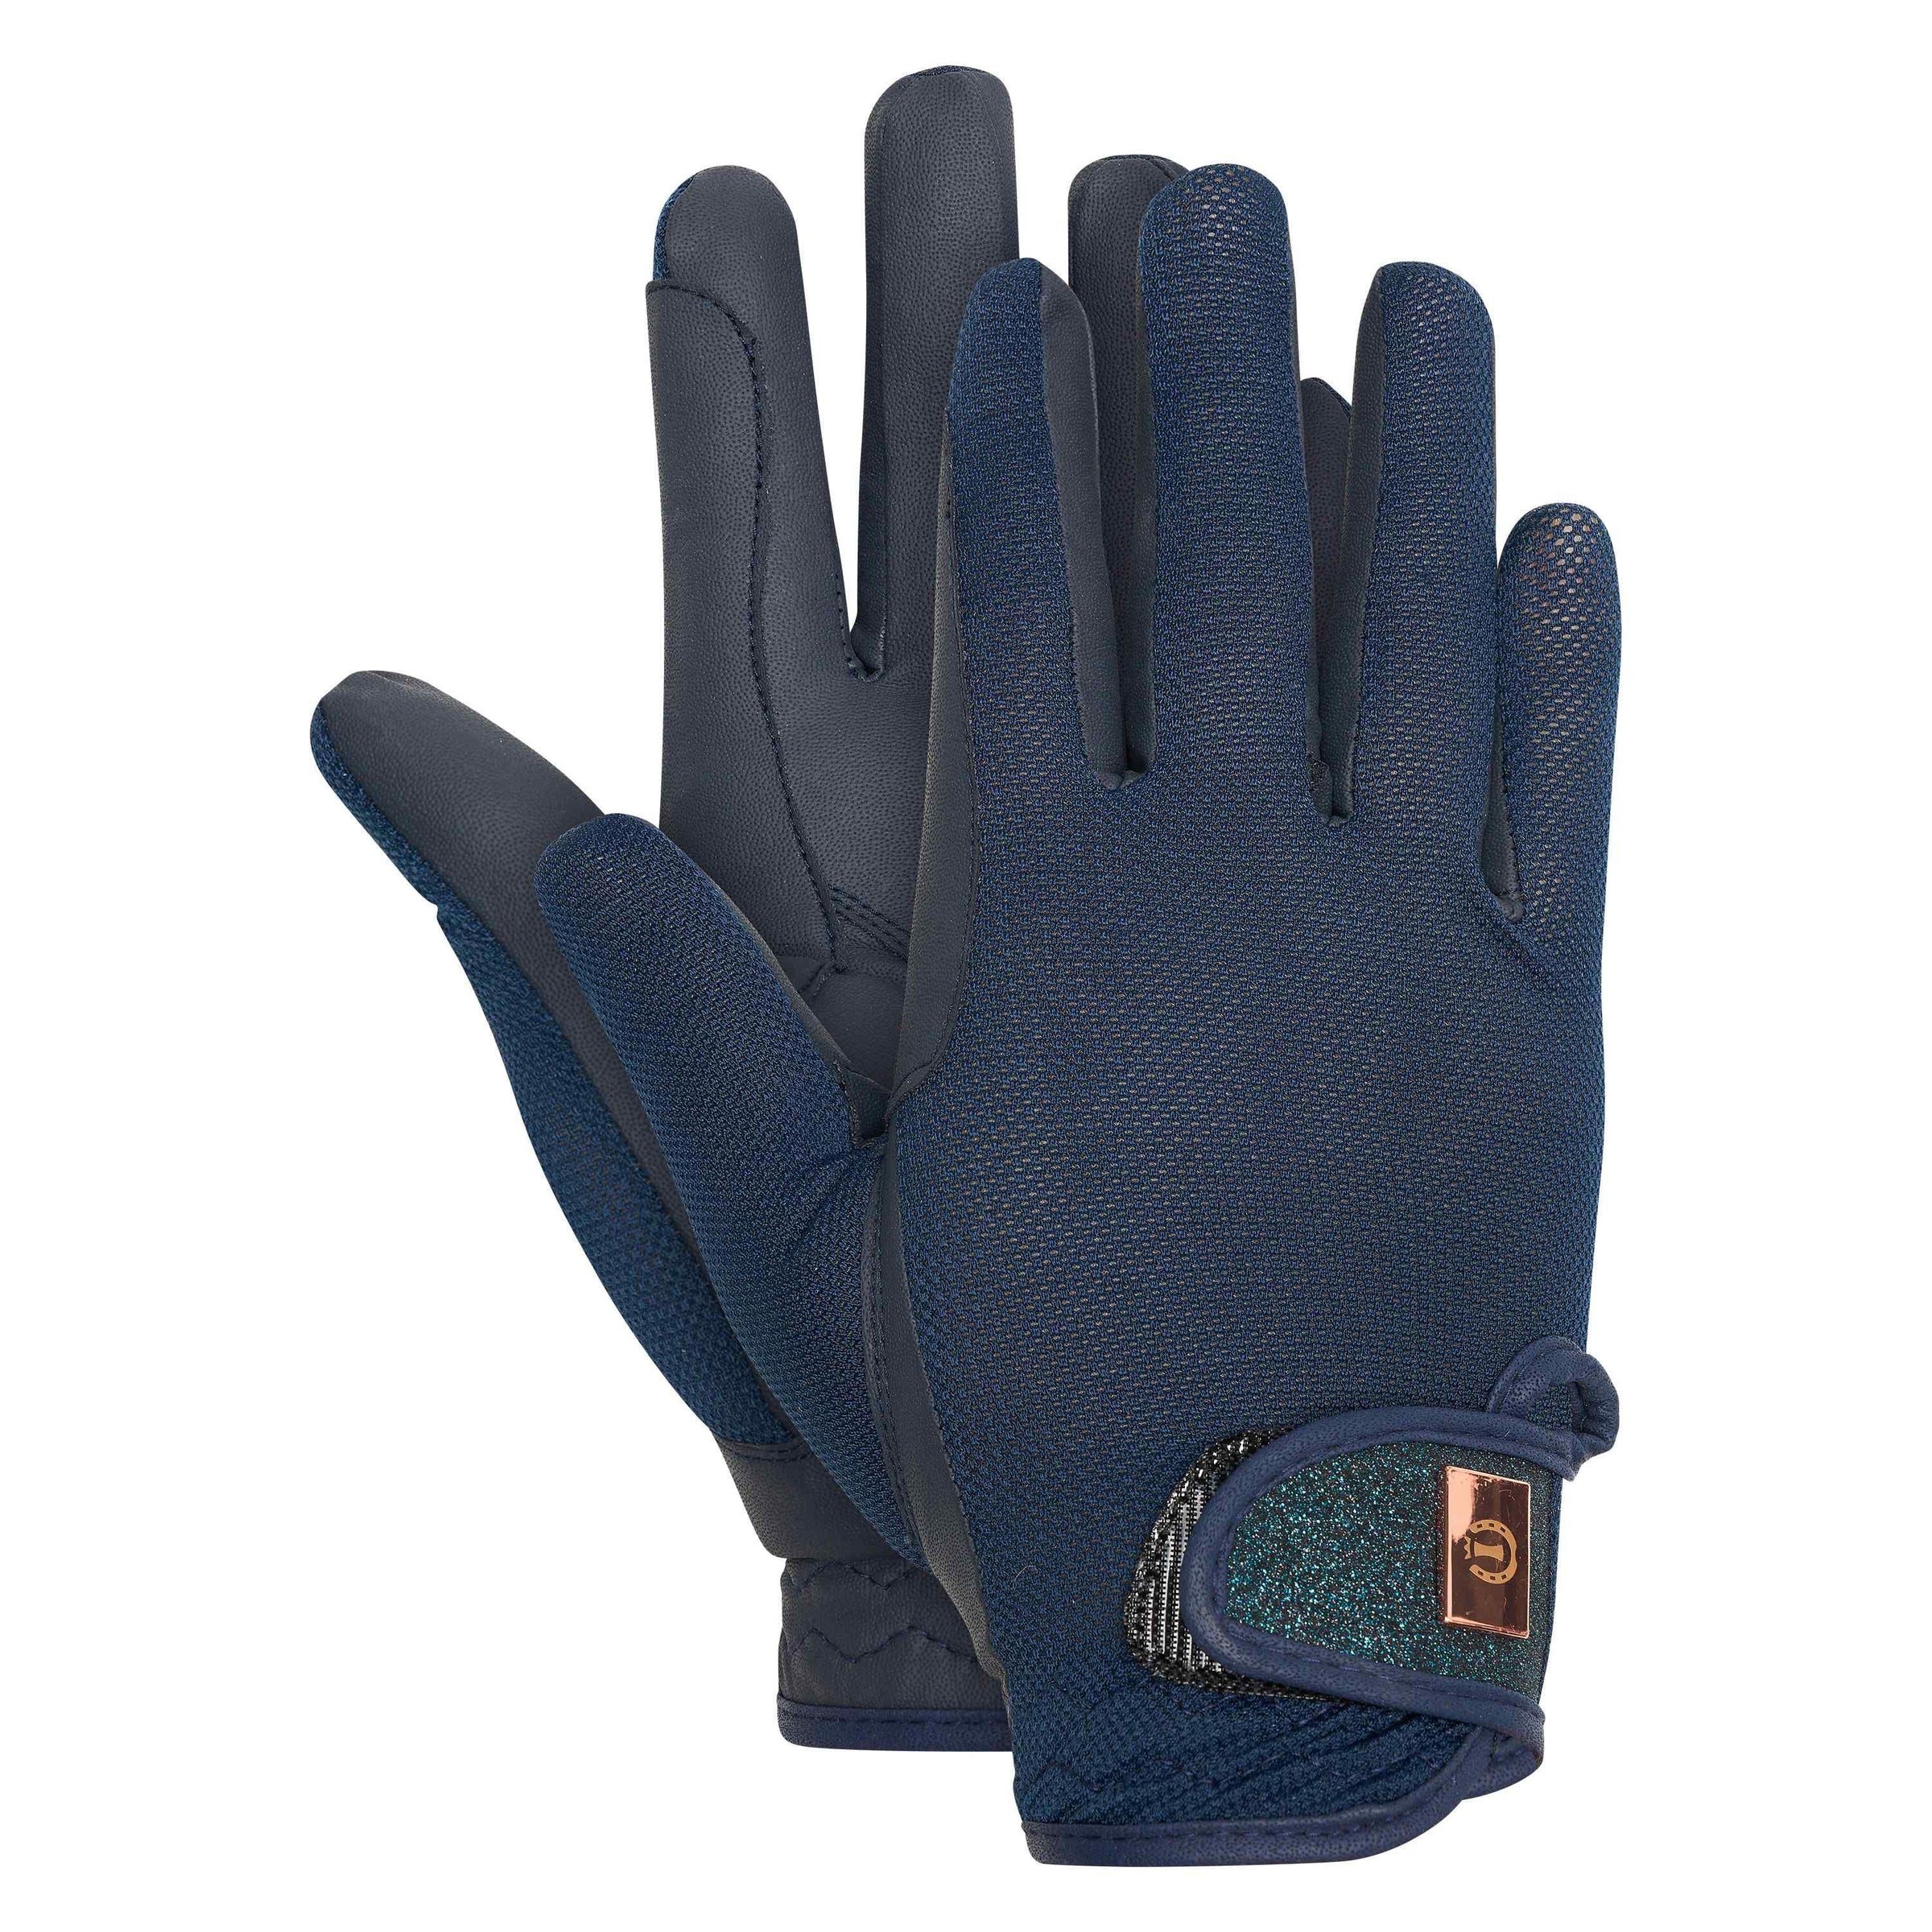 Imperial riding Navy summer cool gloves